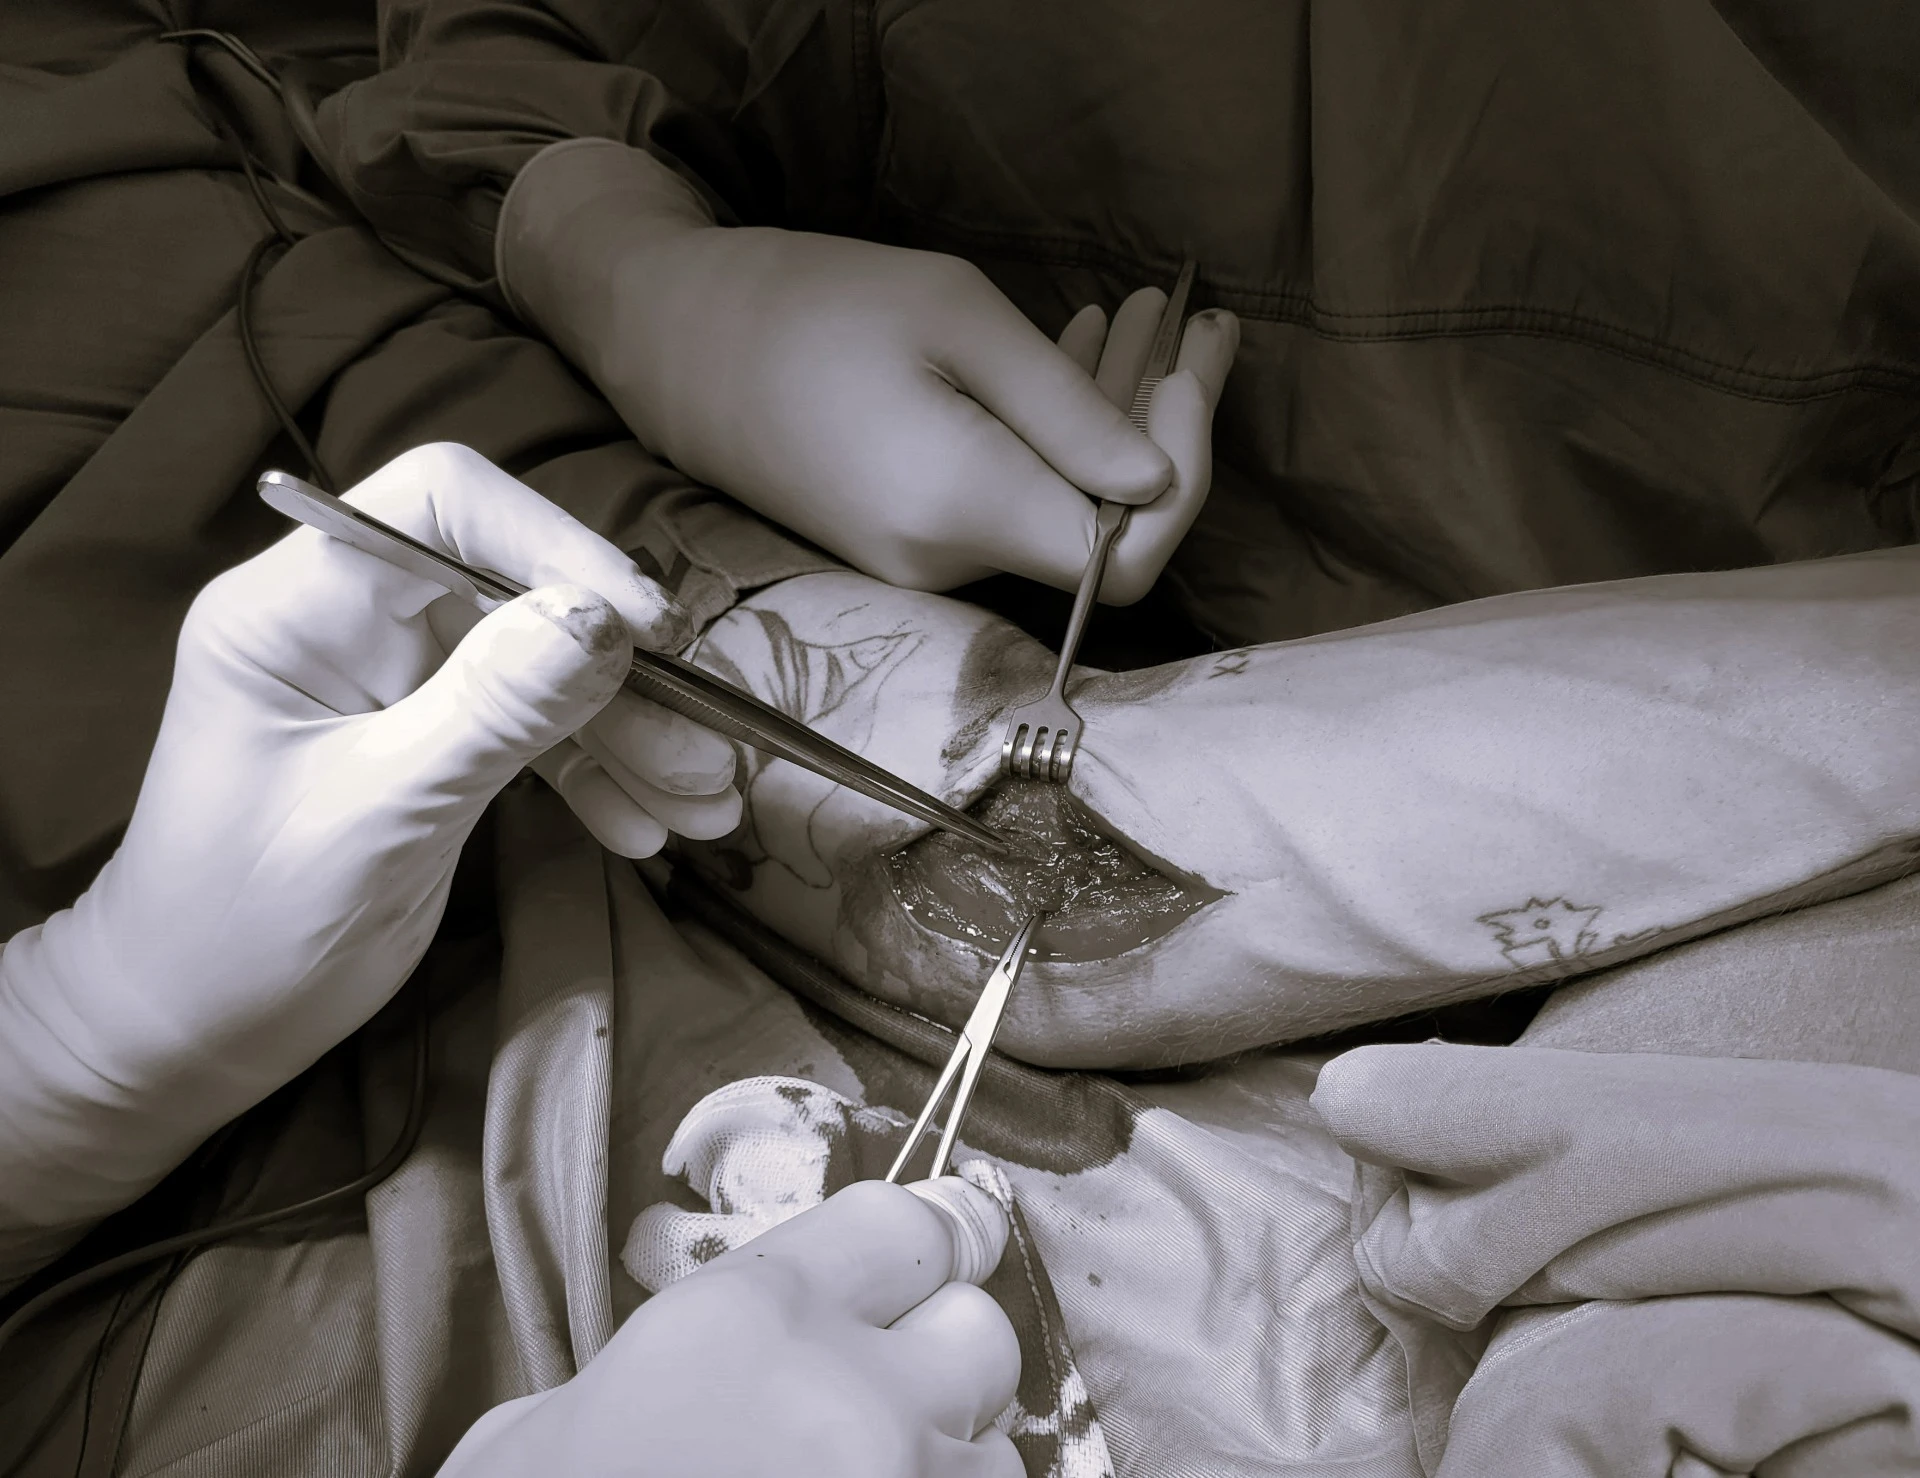 An operation for a thrower's elbow is shown.